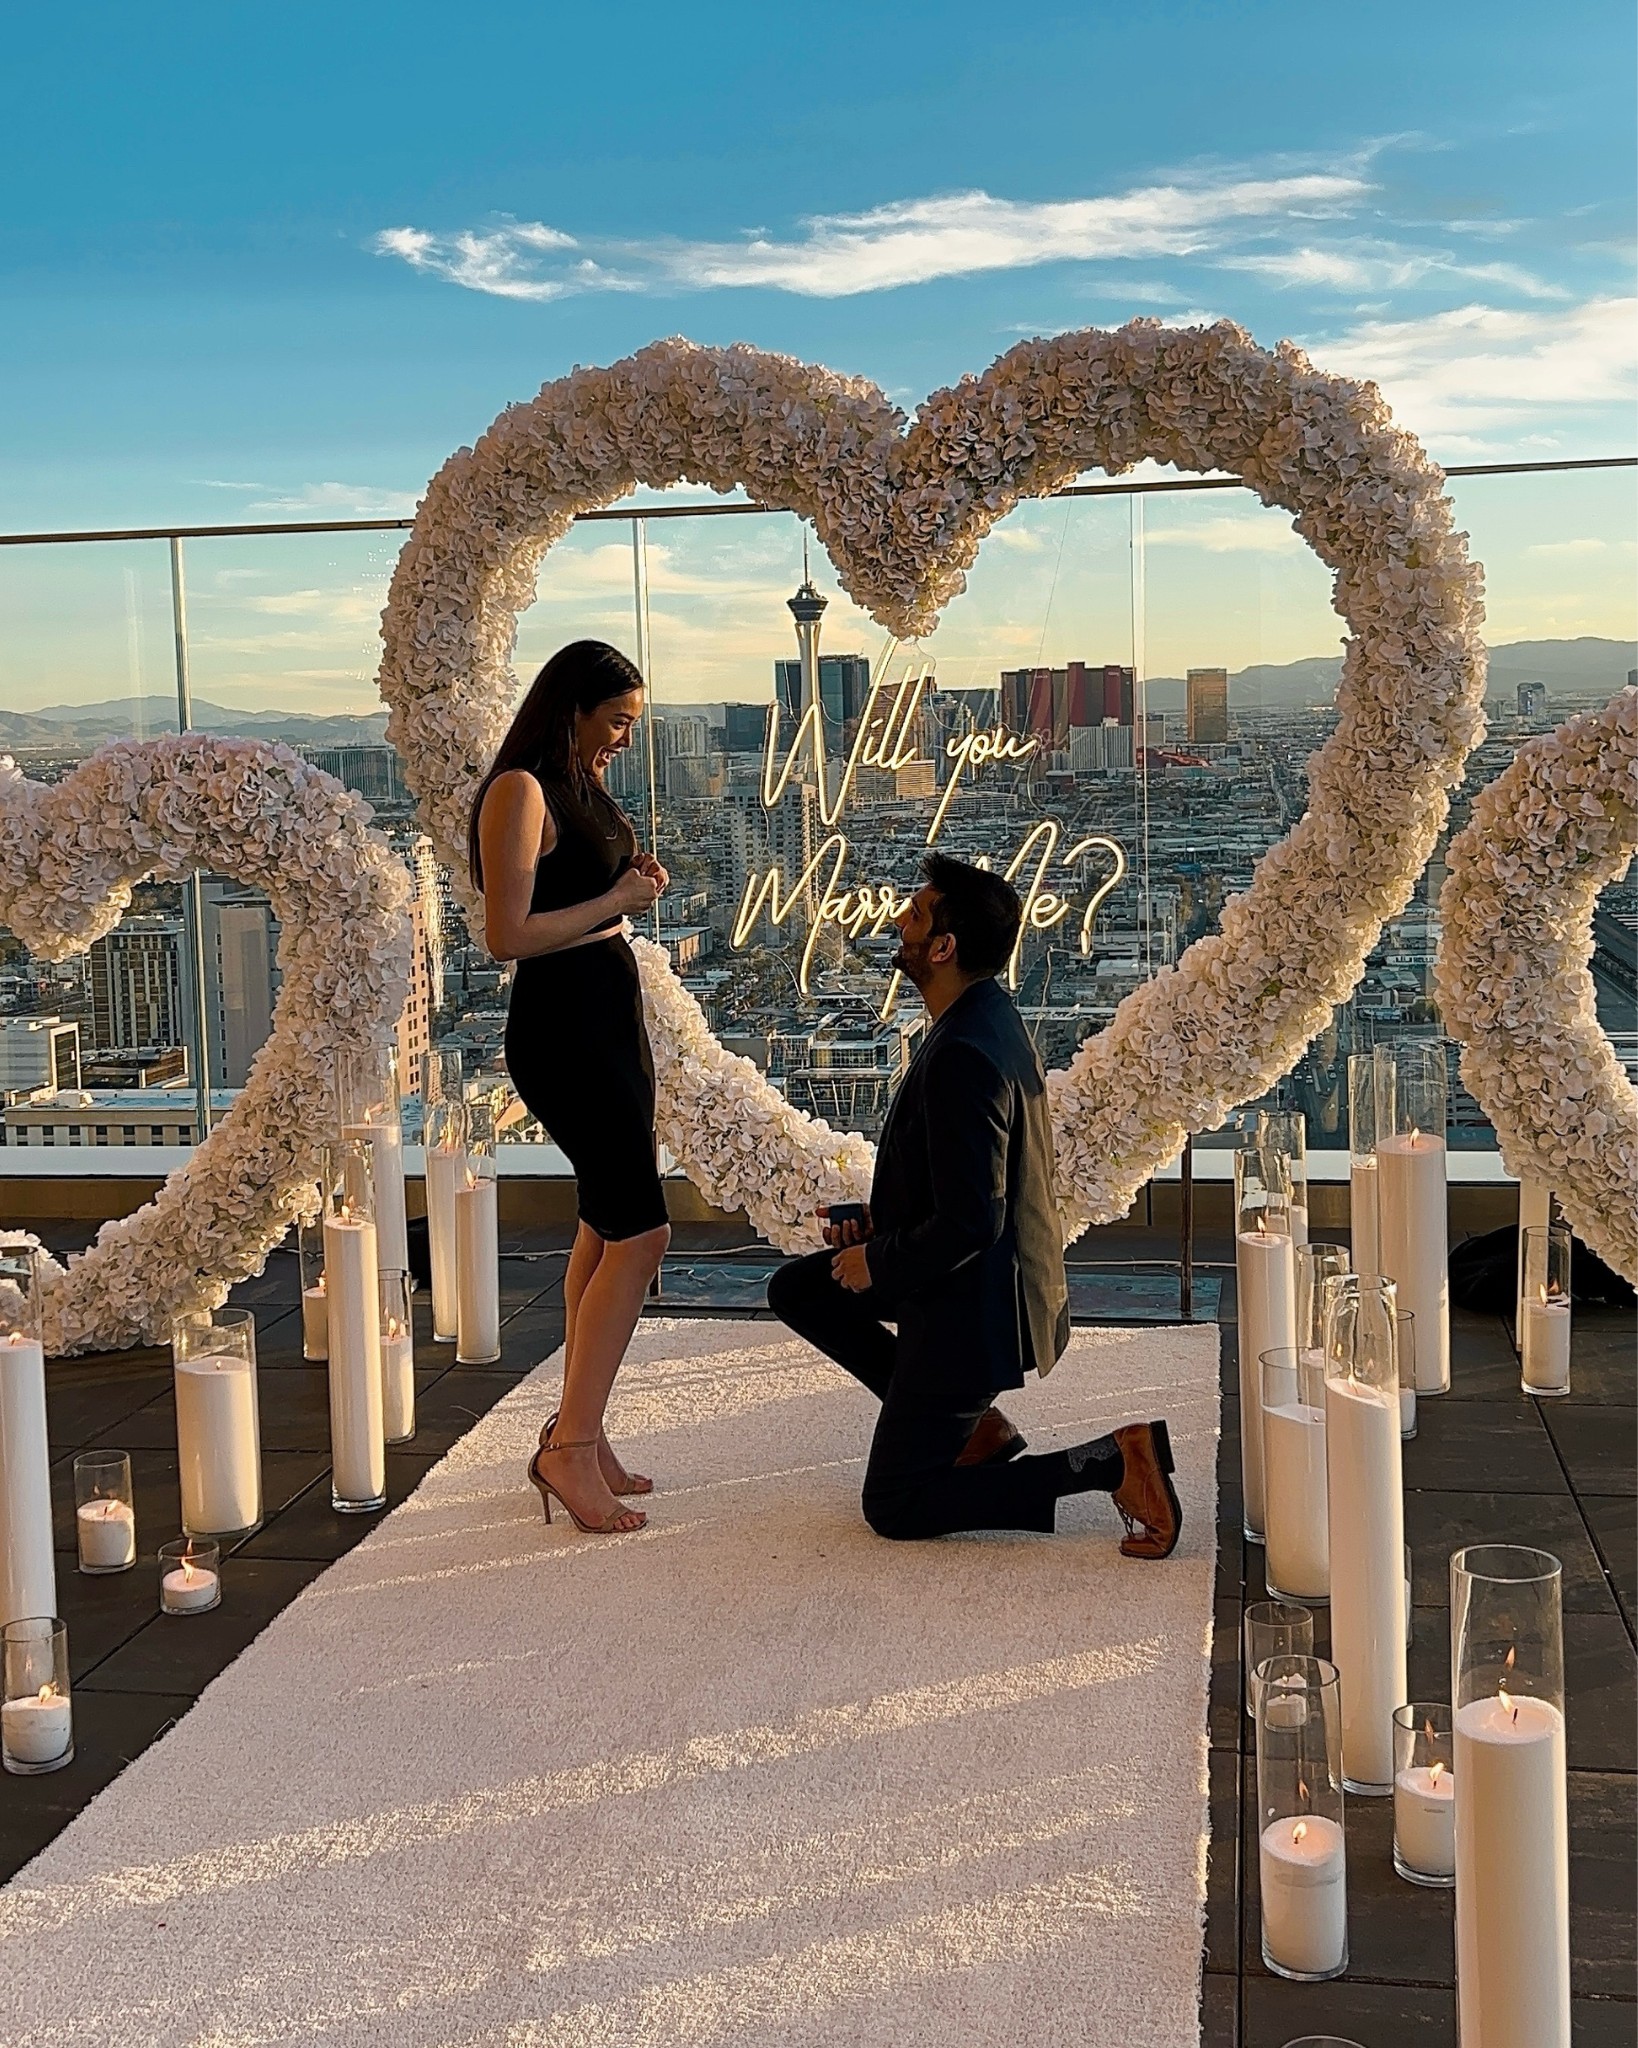 outdoor wedding proposal las vegas strip view rooftop balcony with flower heart and neon will you marry me sign